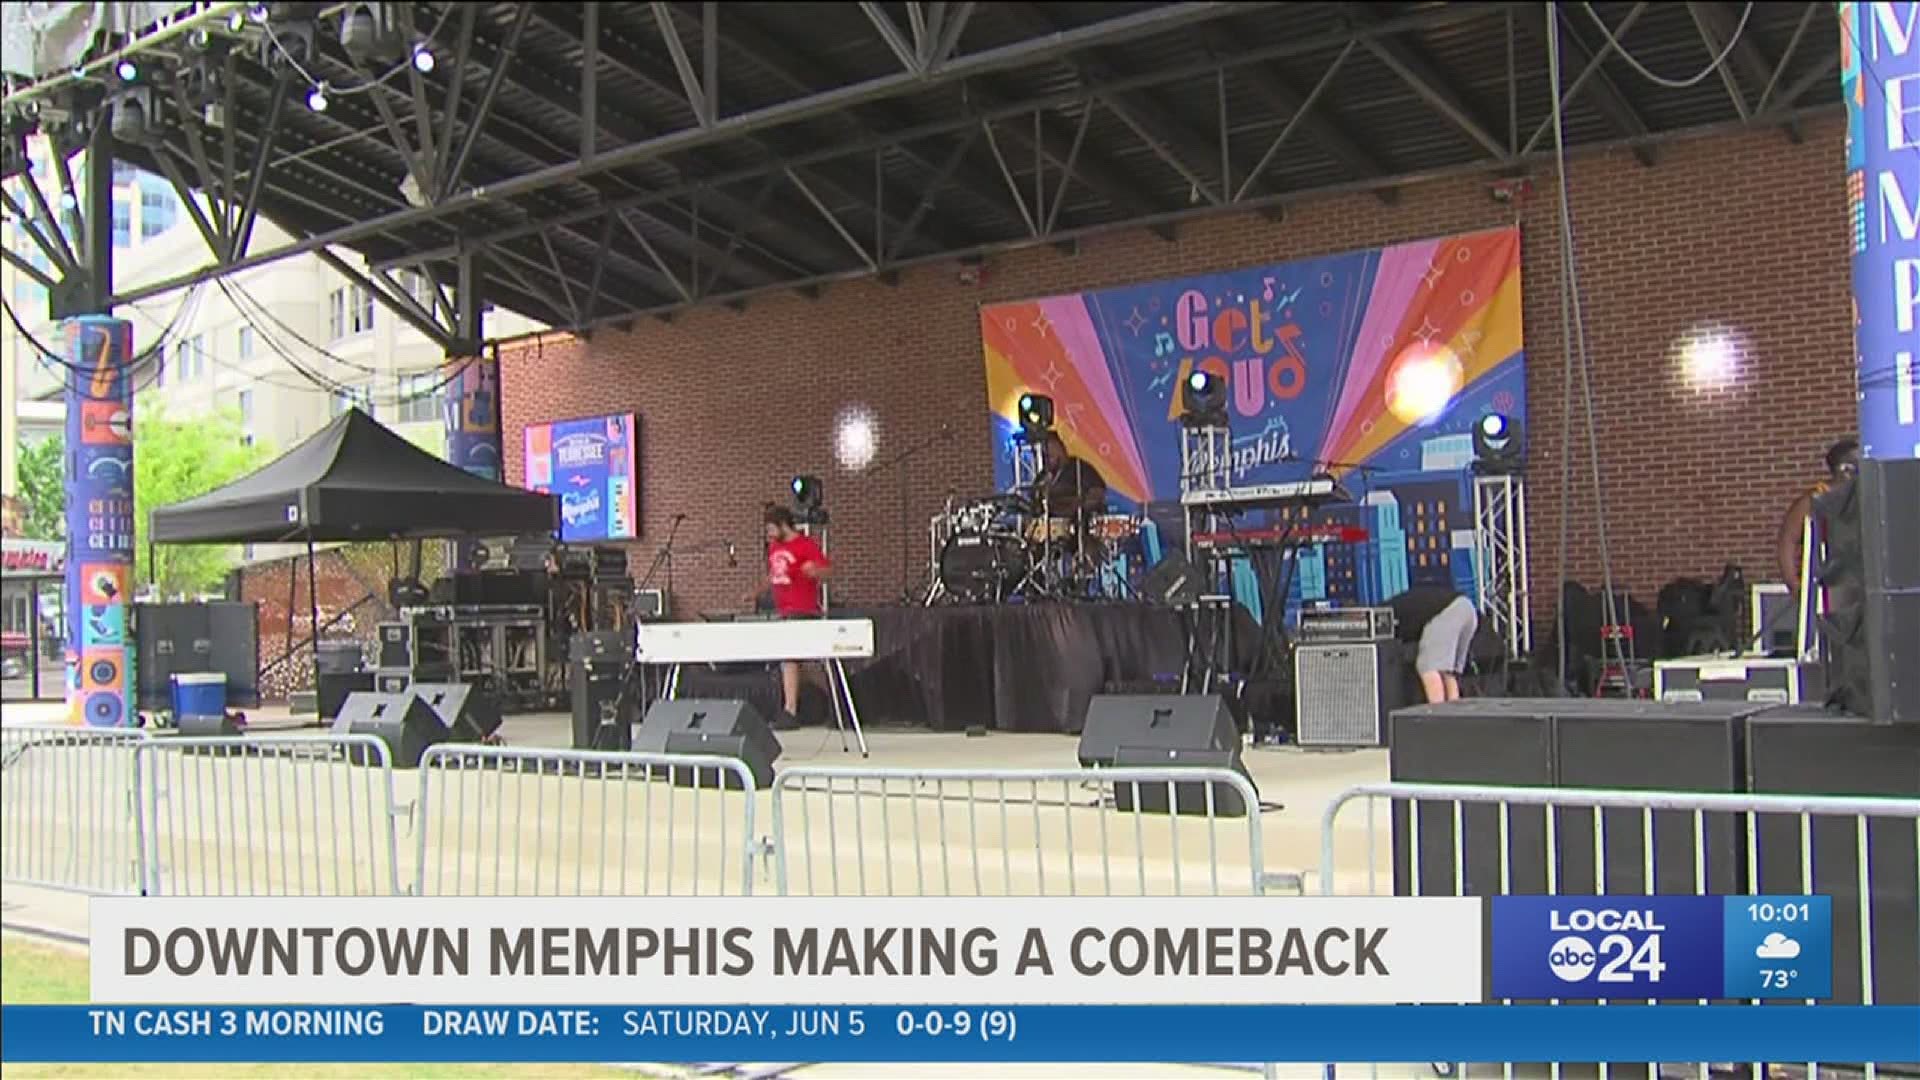 Free concerts, Memphis Redbirds baseball games, and other events are planned this summer.